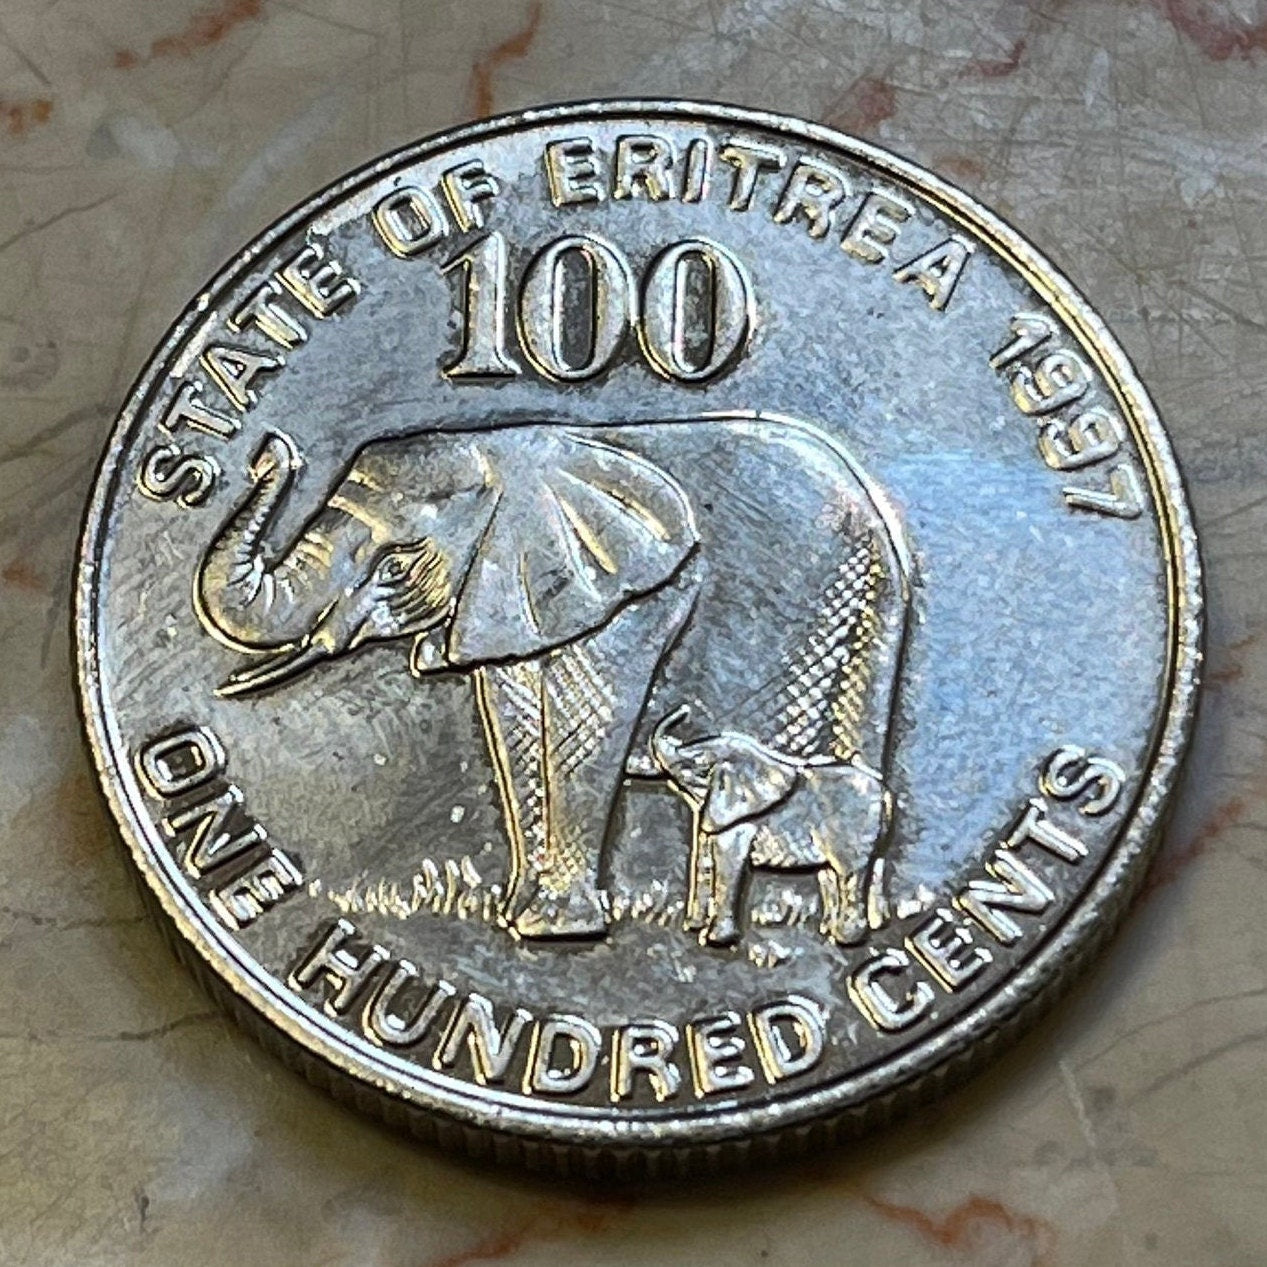 Elephant with Baby & Liberty Equality Justice 100 Cents Eritrea Authentic Coin Money for Jewelry and Craft Making